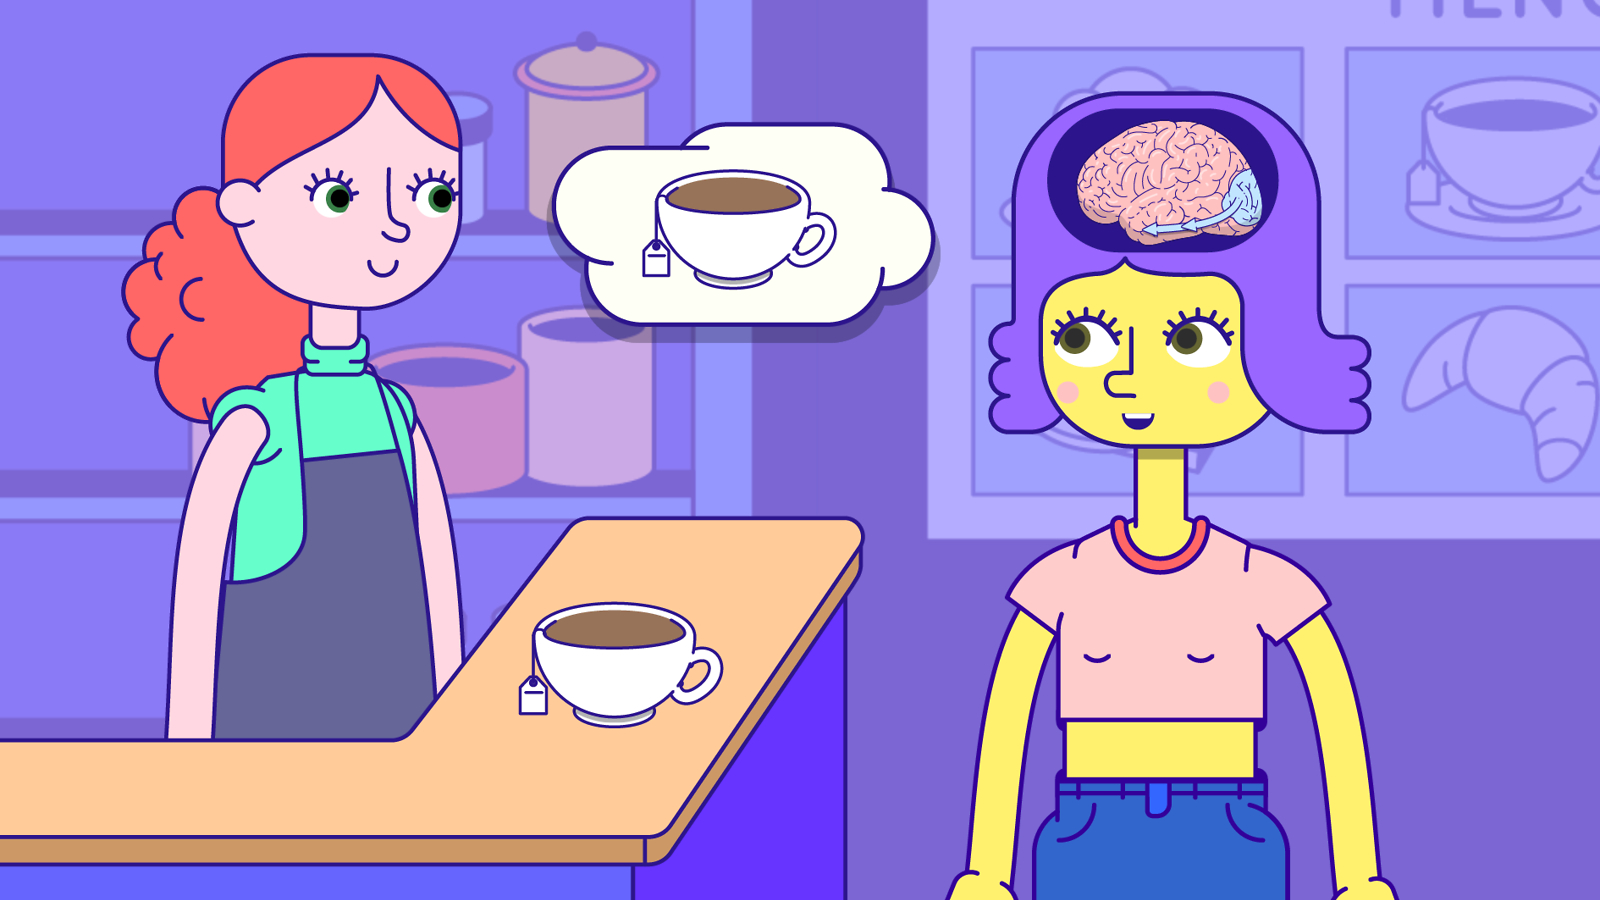 Illustration of cartoon, a thought bubble between a barista and a customer contains a cup of coffee